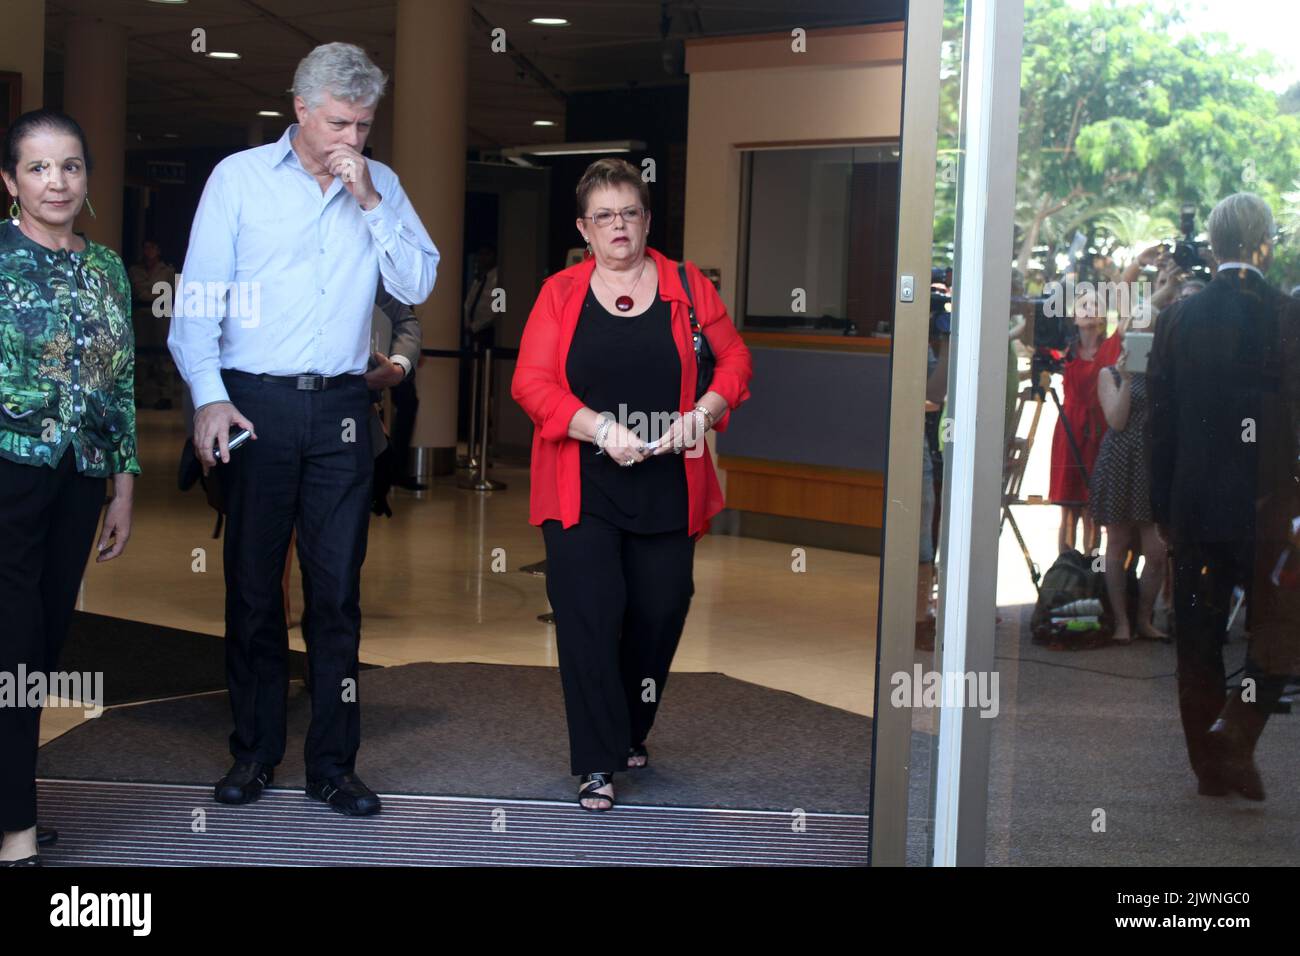 Lindy Chamberlain-Creighton (red jacket) is accompanied by her husband Rick Creighton as she exits the Magistrates Court in Darwin, Friday, Feb. 24, 2012. She had attended the inquest into the death of her daughter Azaria Chamberlain who disappeared from her parents' tent at Uluru (Ayers Rock) in August 1980. Image: Xavier La Canna Stock Photo